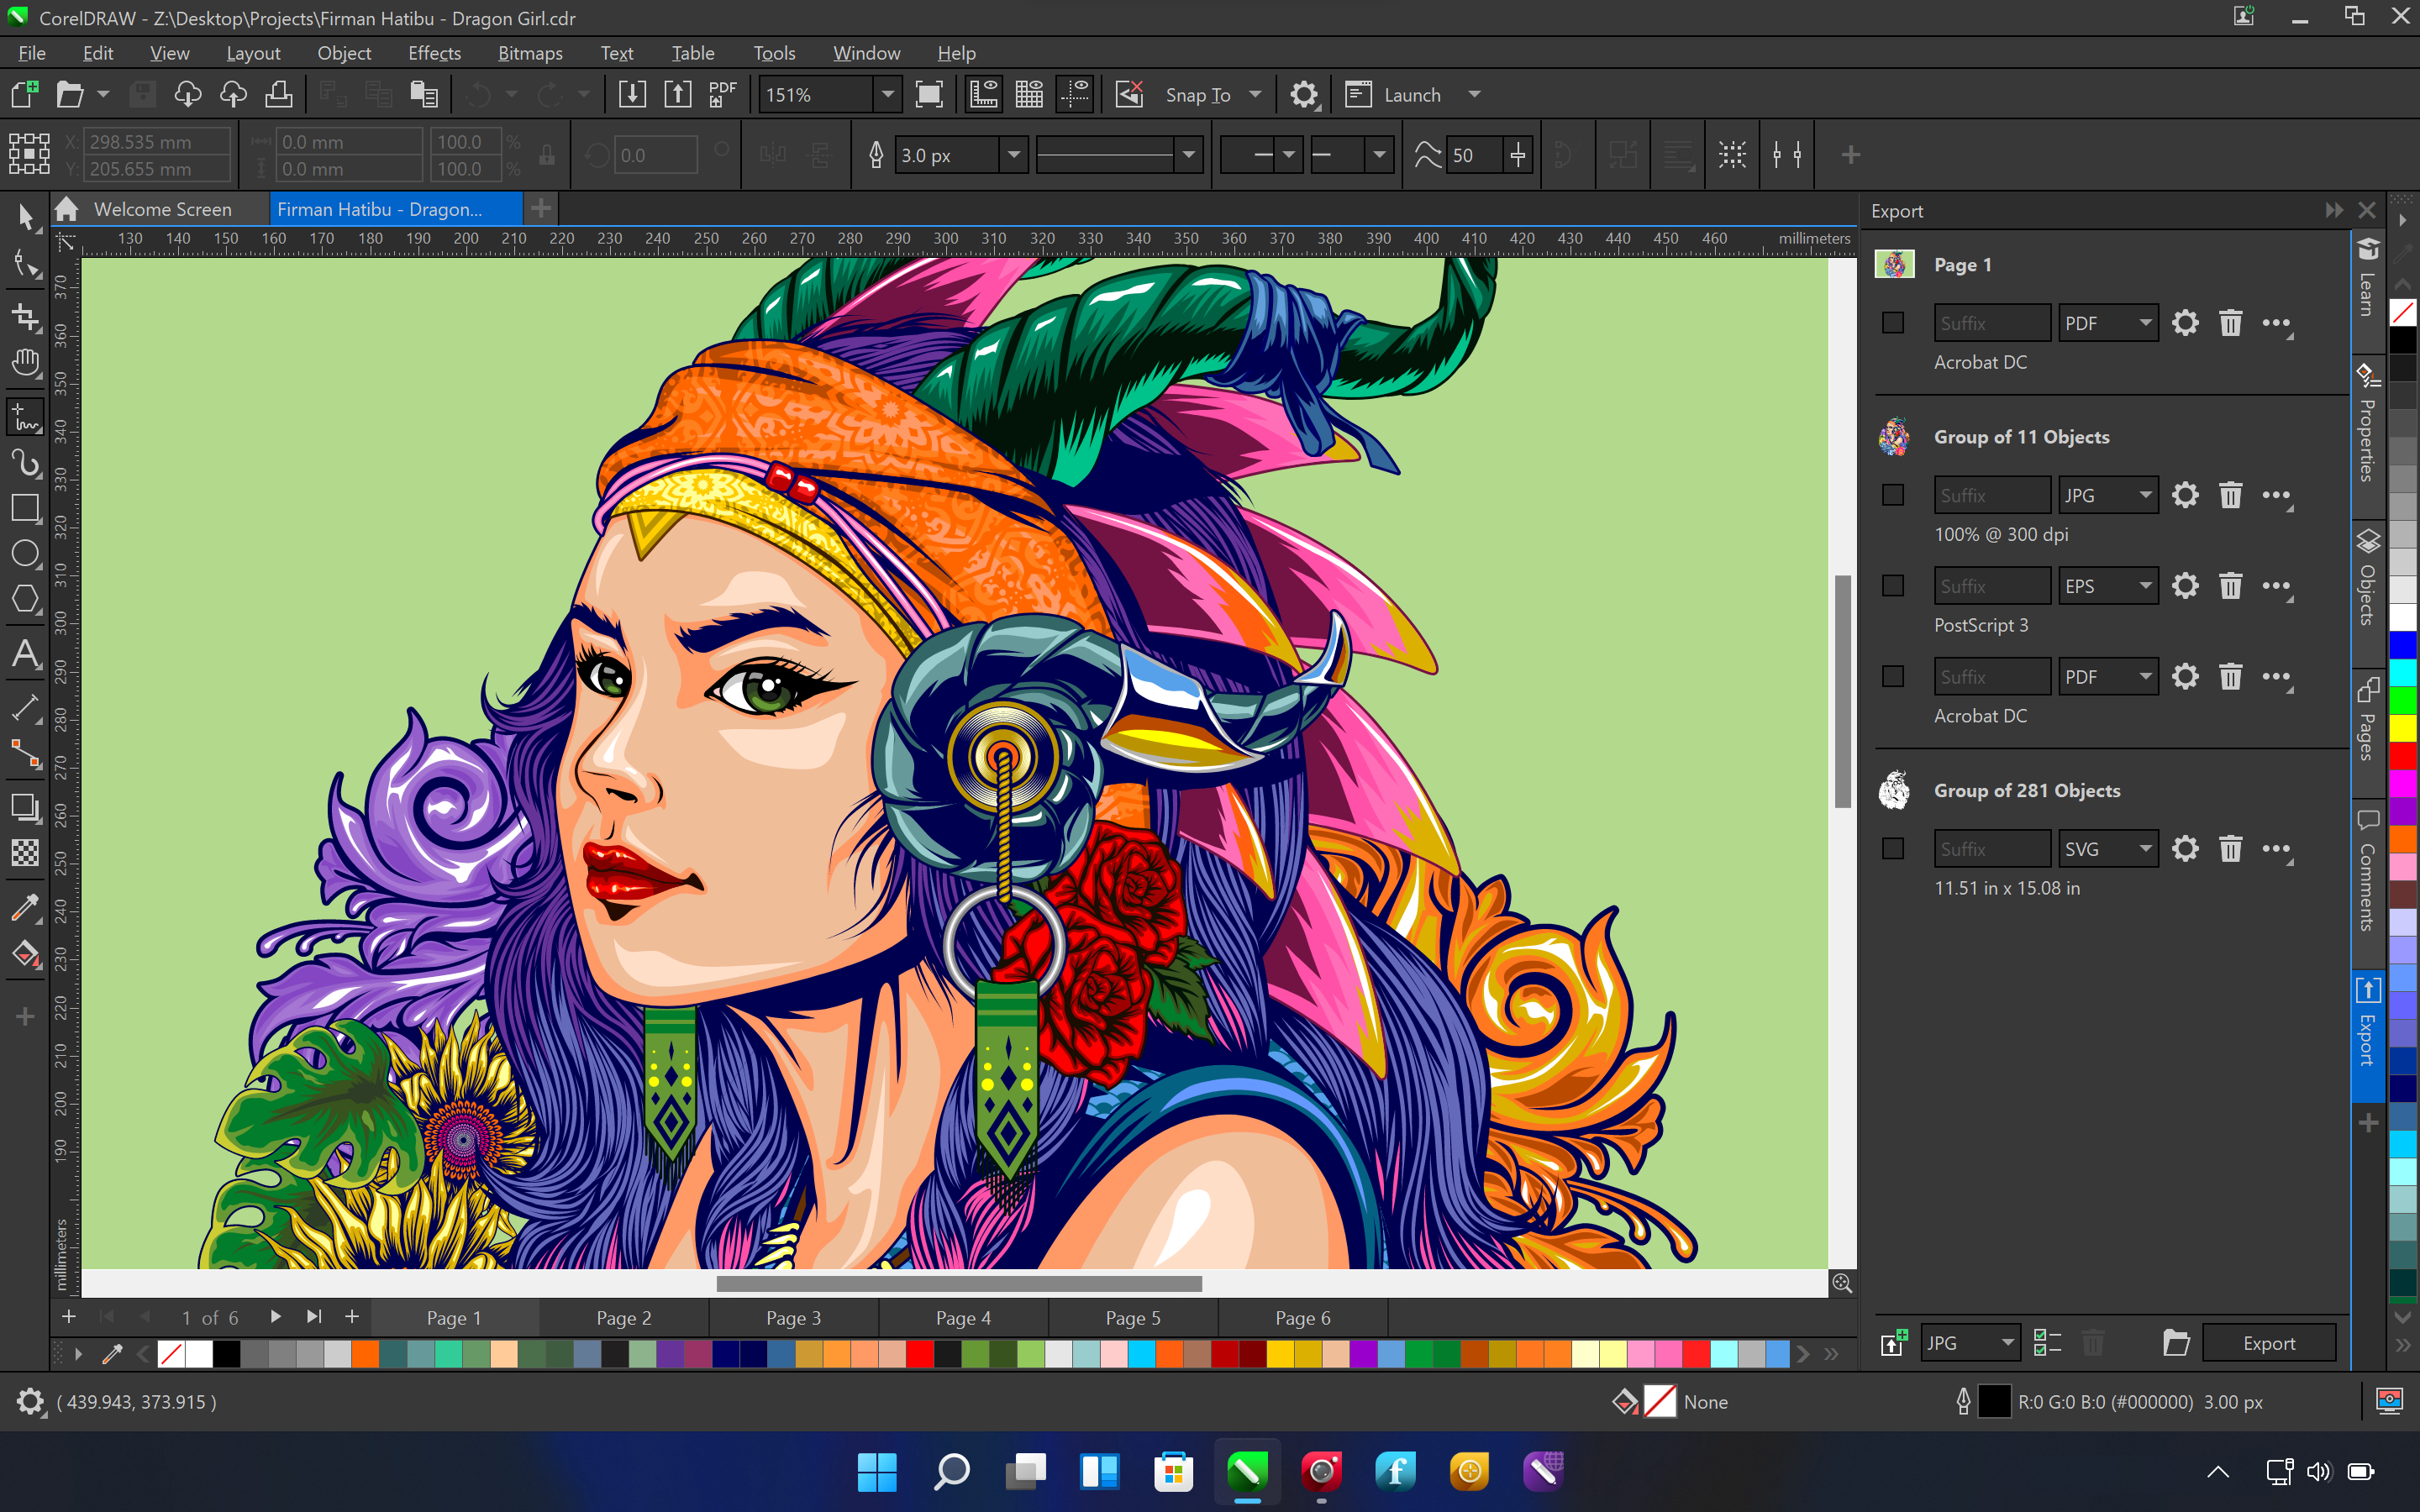 CorelDRAW Technical Suite 2023 v24.5.0.731 download the new version